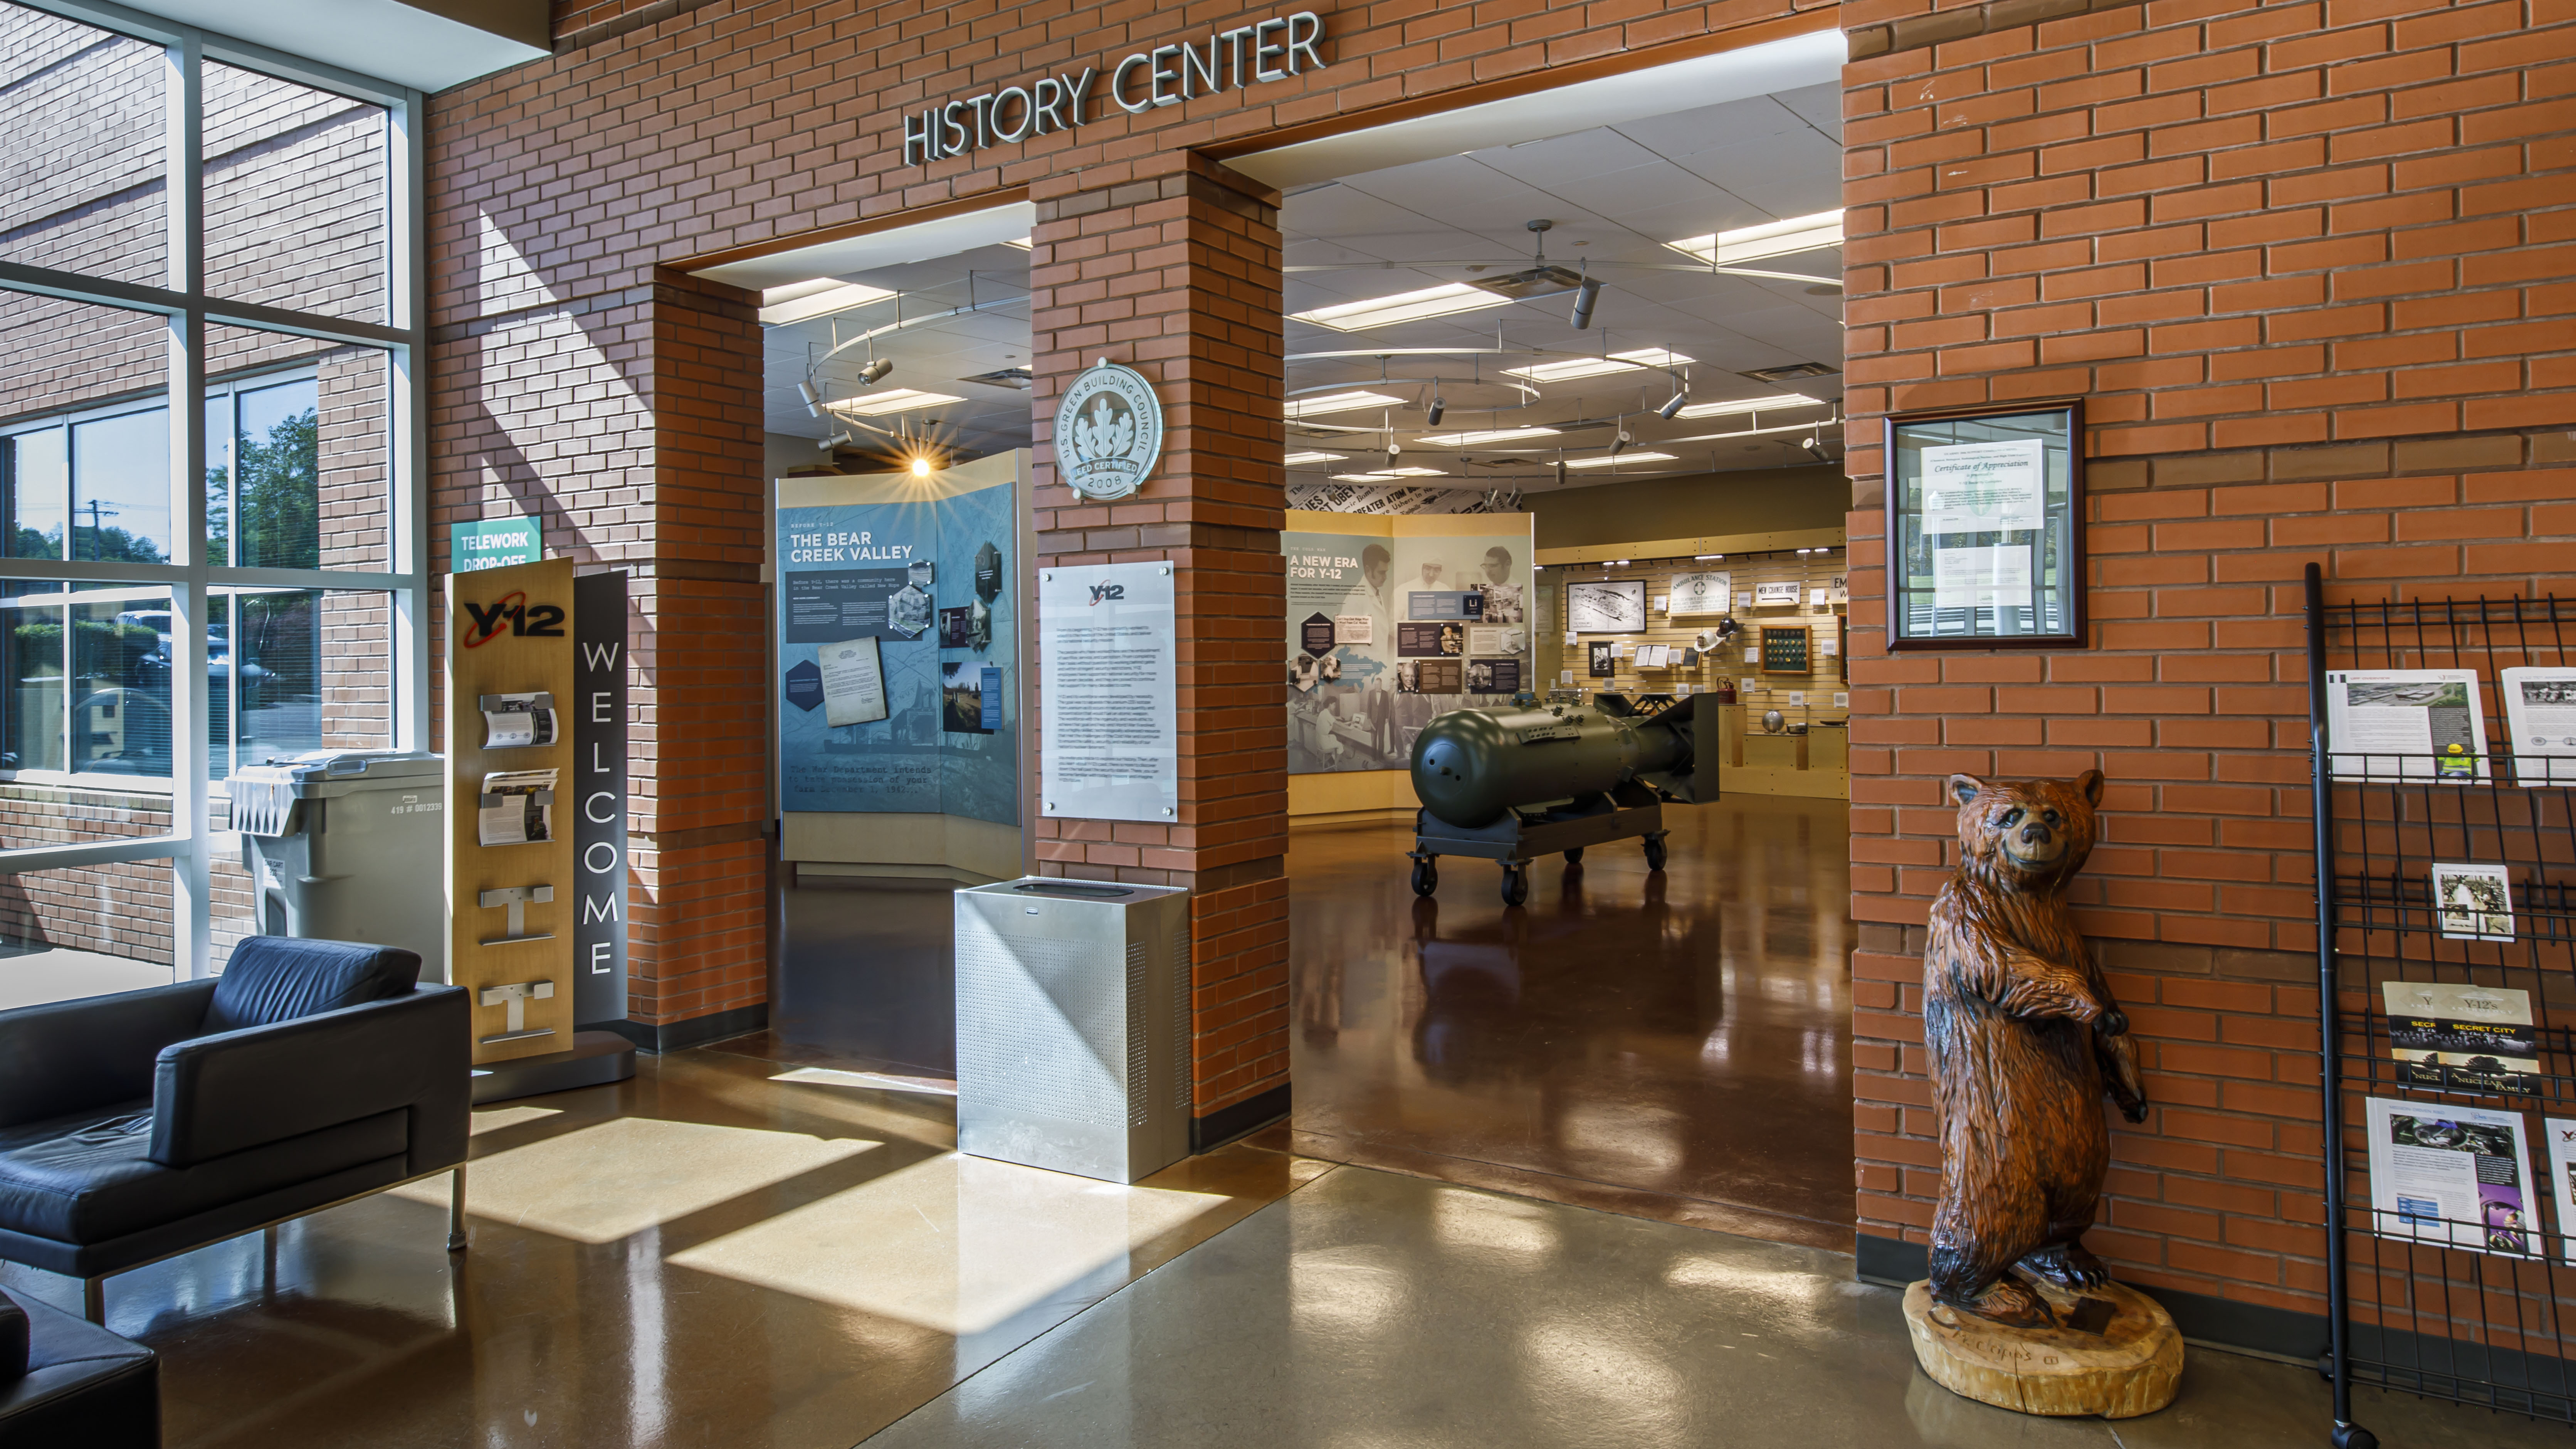 The Y-12 History Center, located within the New Hope Center at Y-12